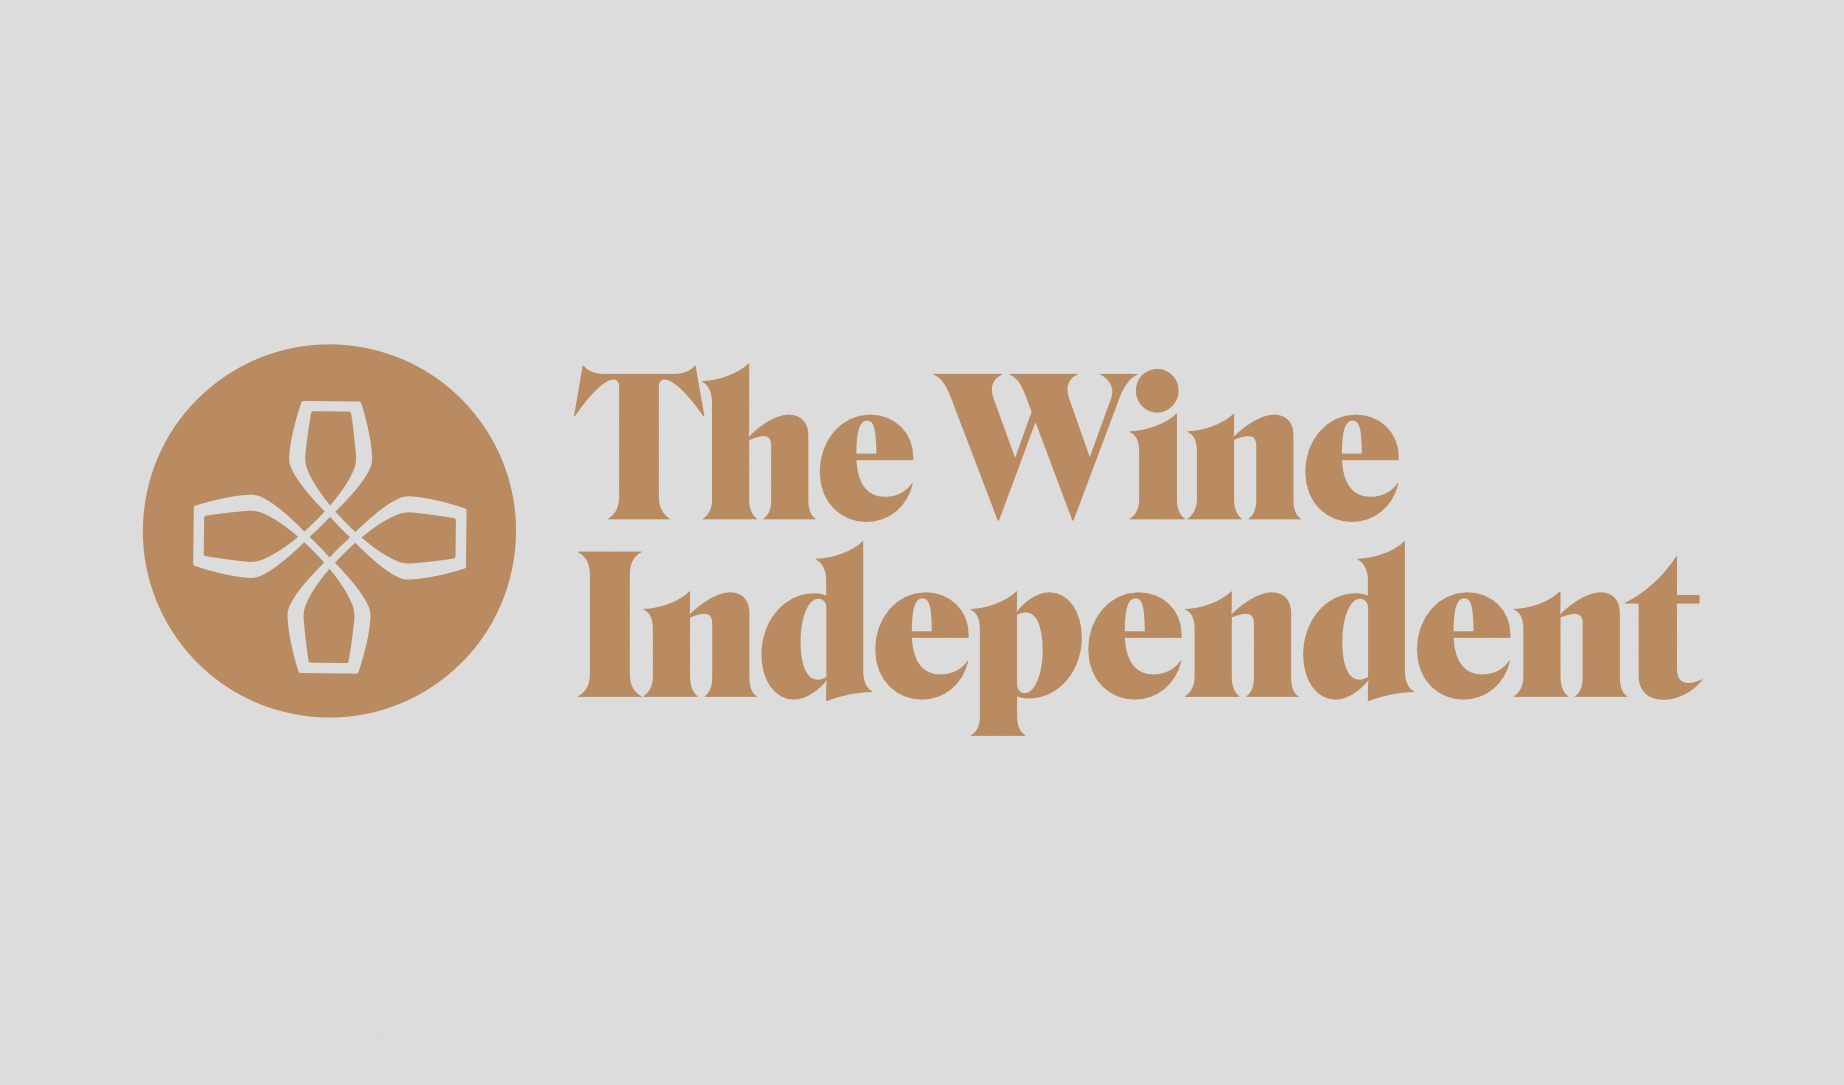 The Wine Independent